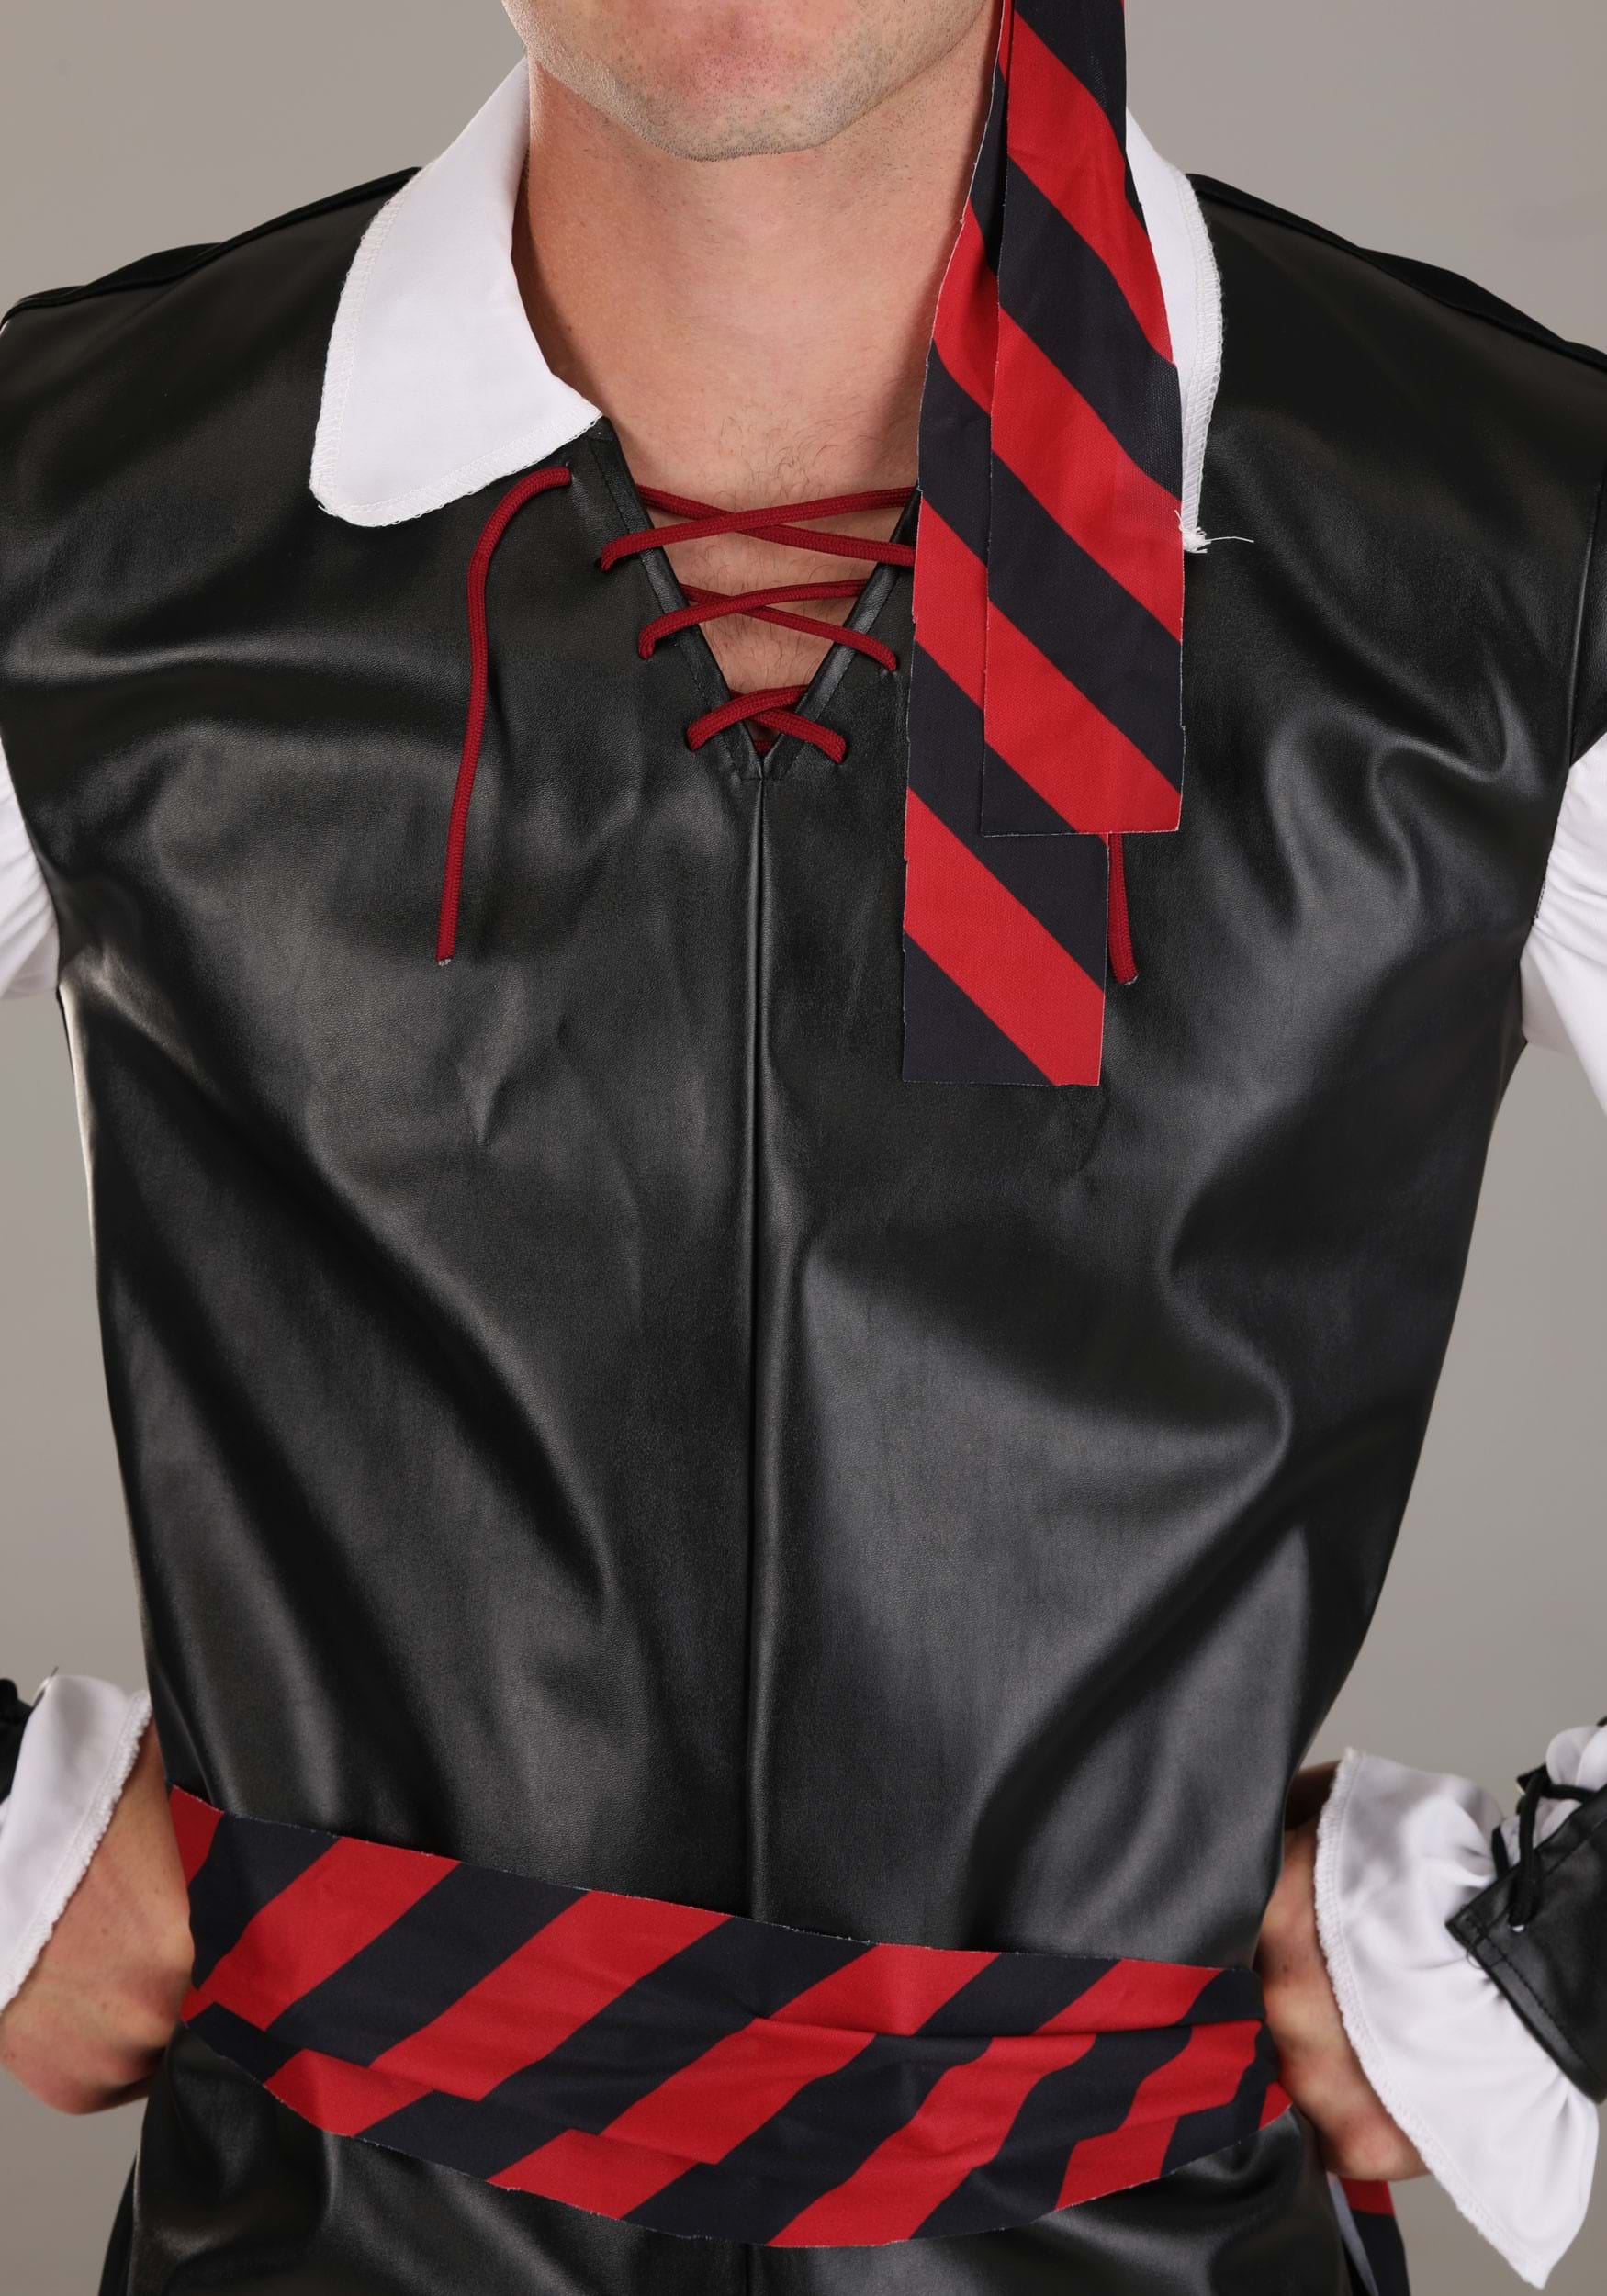 Budget Pirate Costume For Men